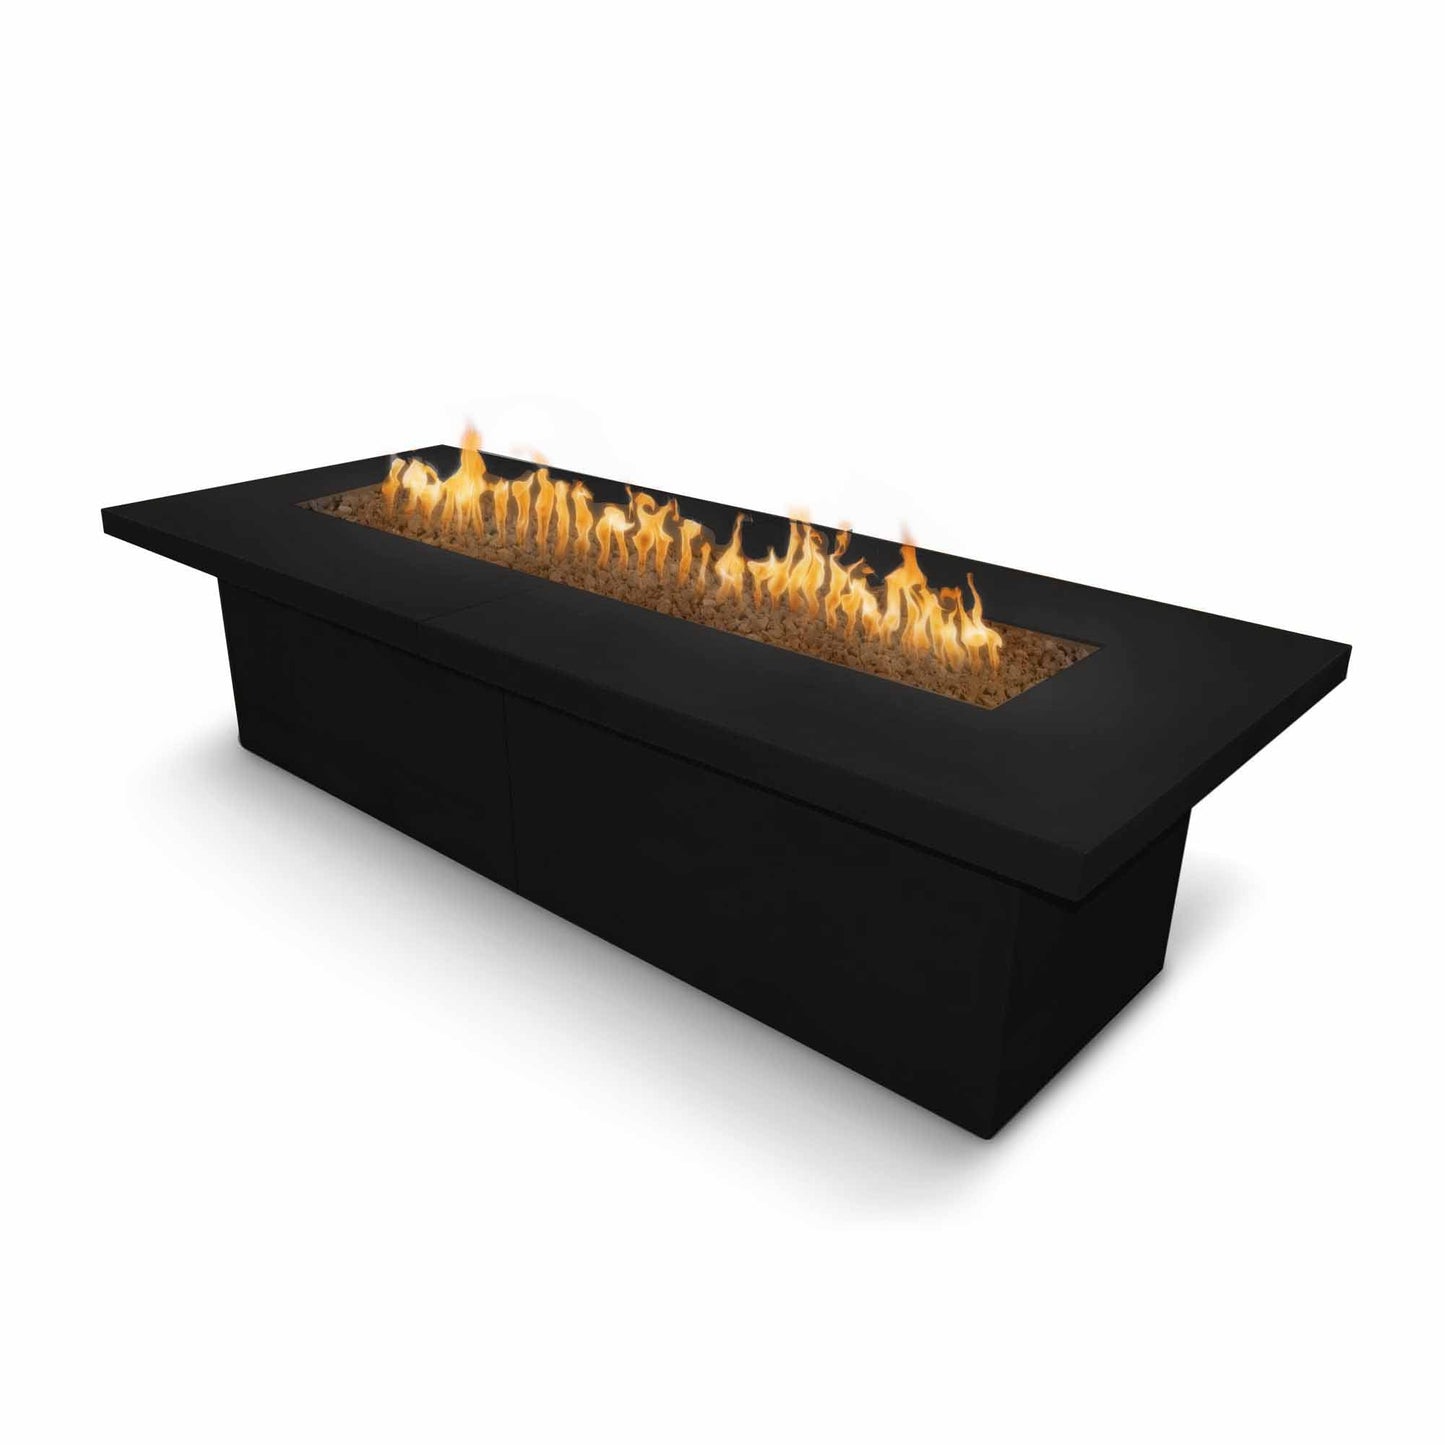 The Outdoor Plus Rectangular Newport 120" Stainless Steel Liquid Propane Fire Pit with 12V Electronic Ignition